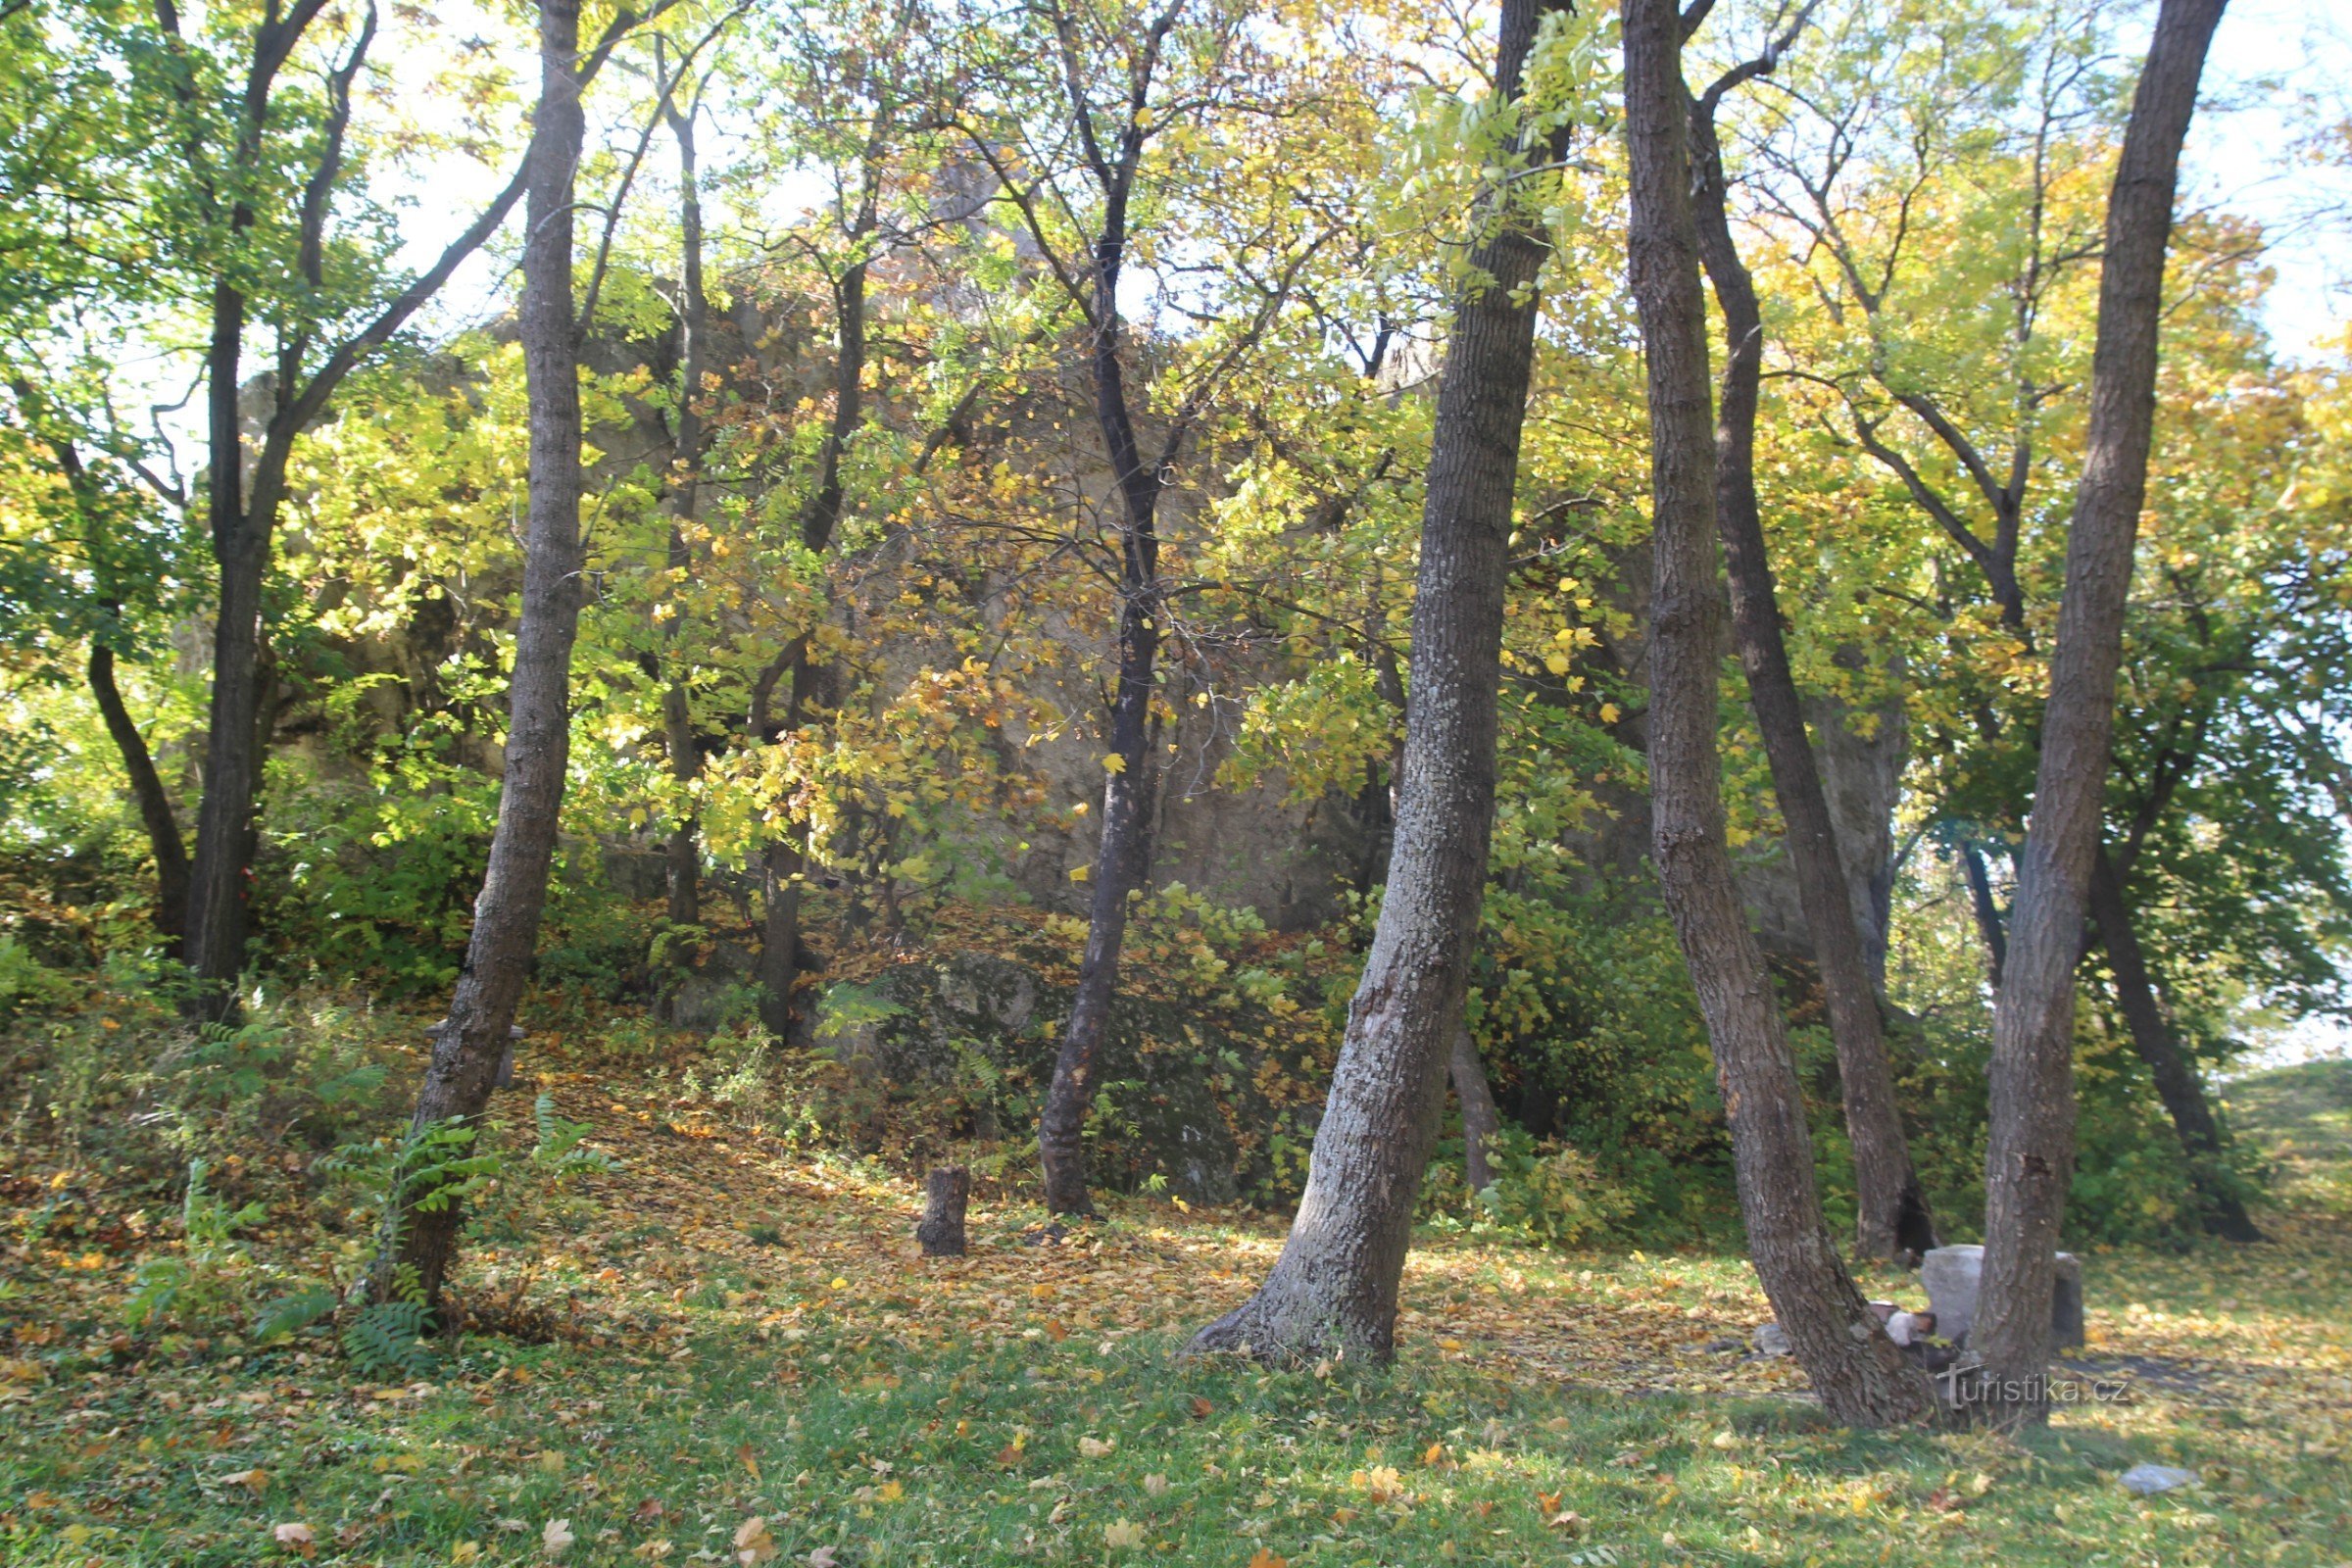 Mostly maples and ash trees grow around the Devil's Stone